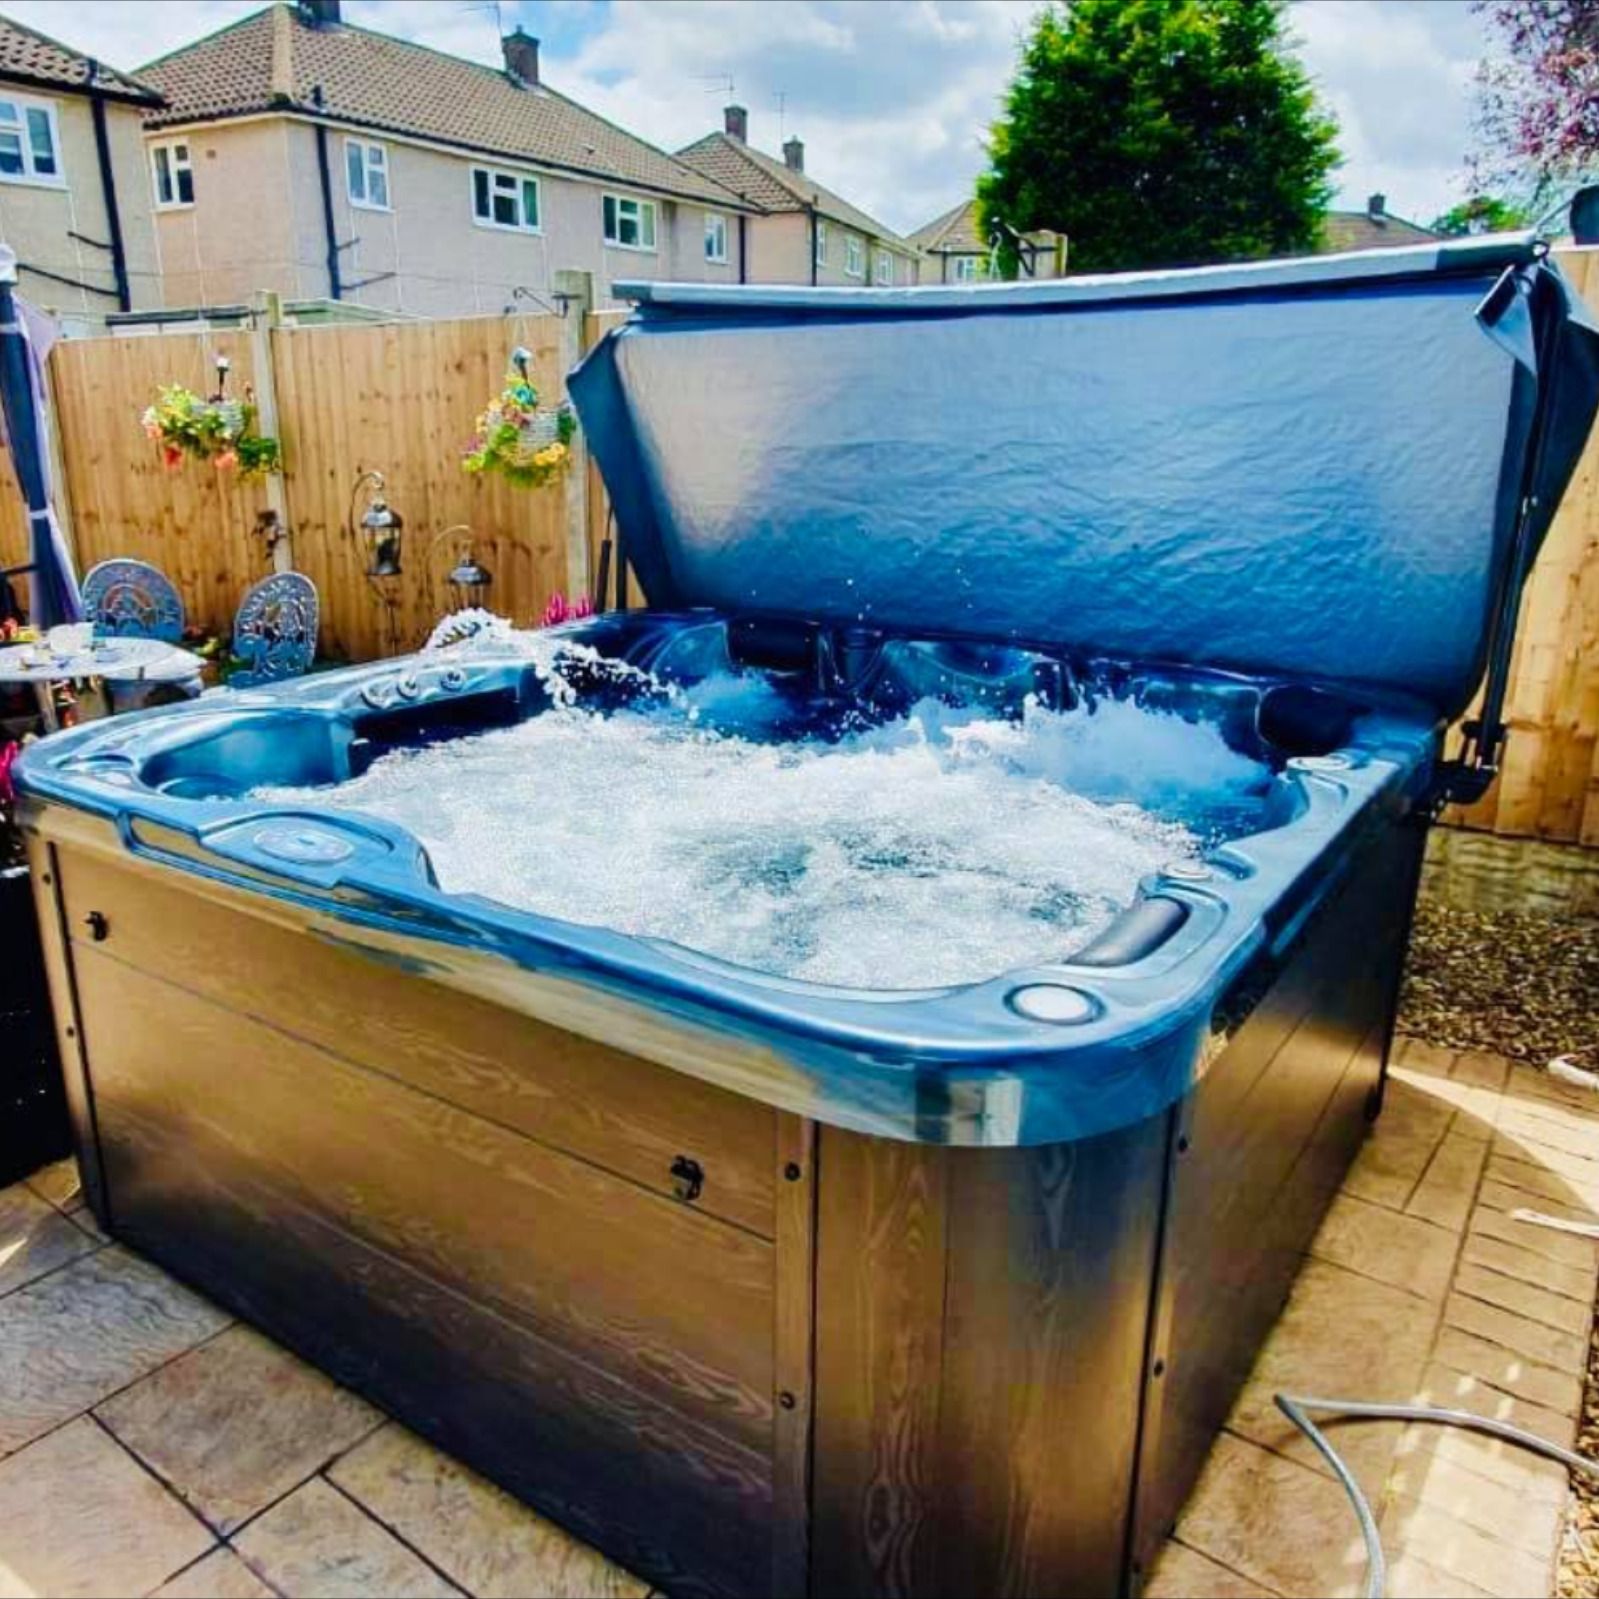 Beautiful hot tub just installed in this UK garden